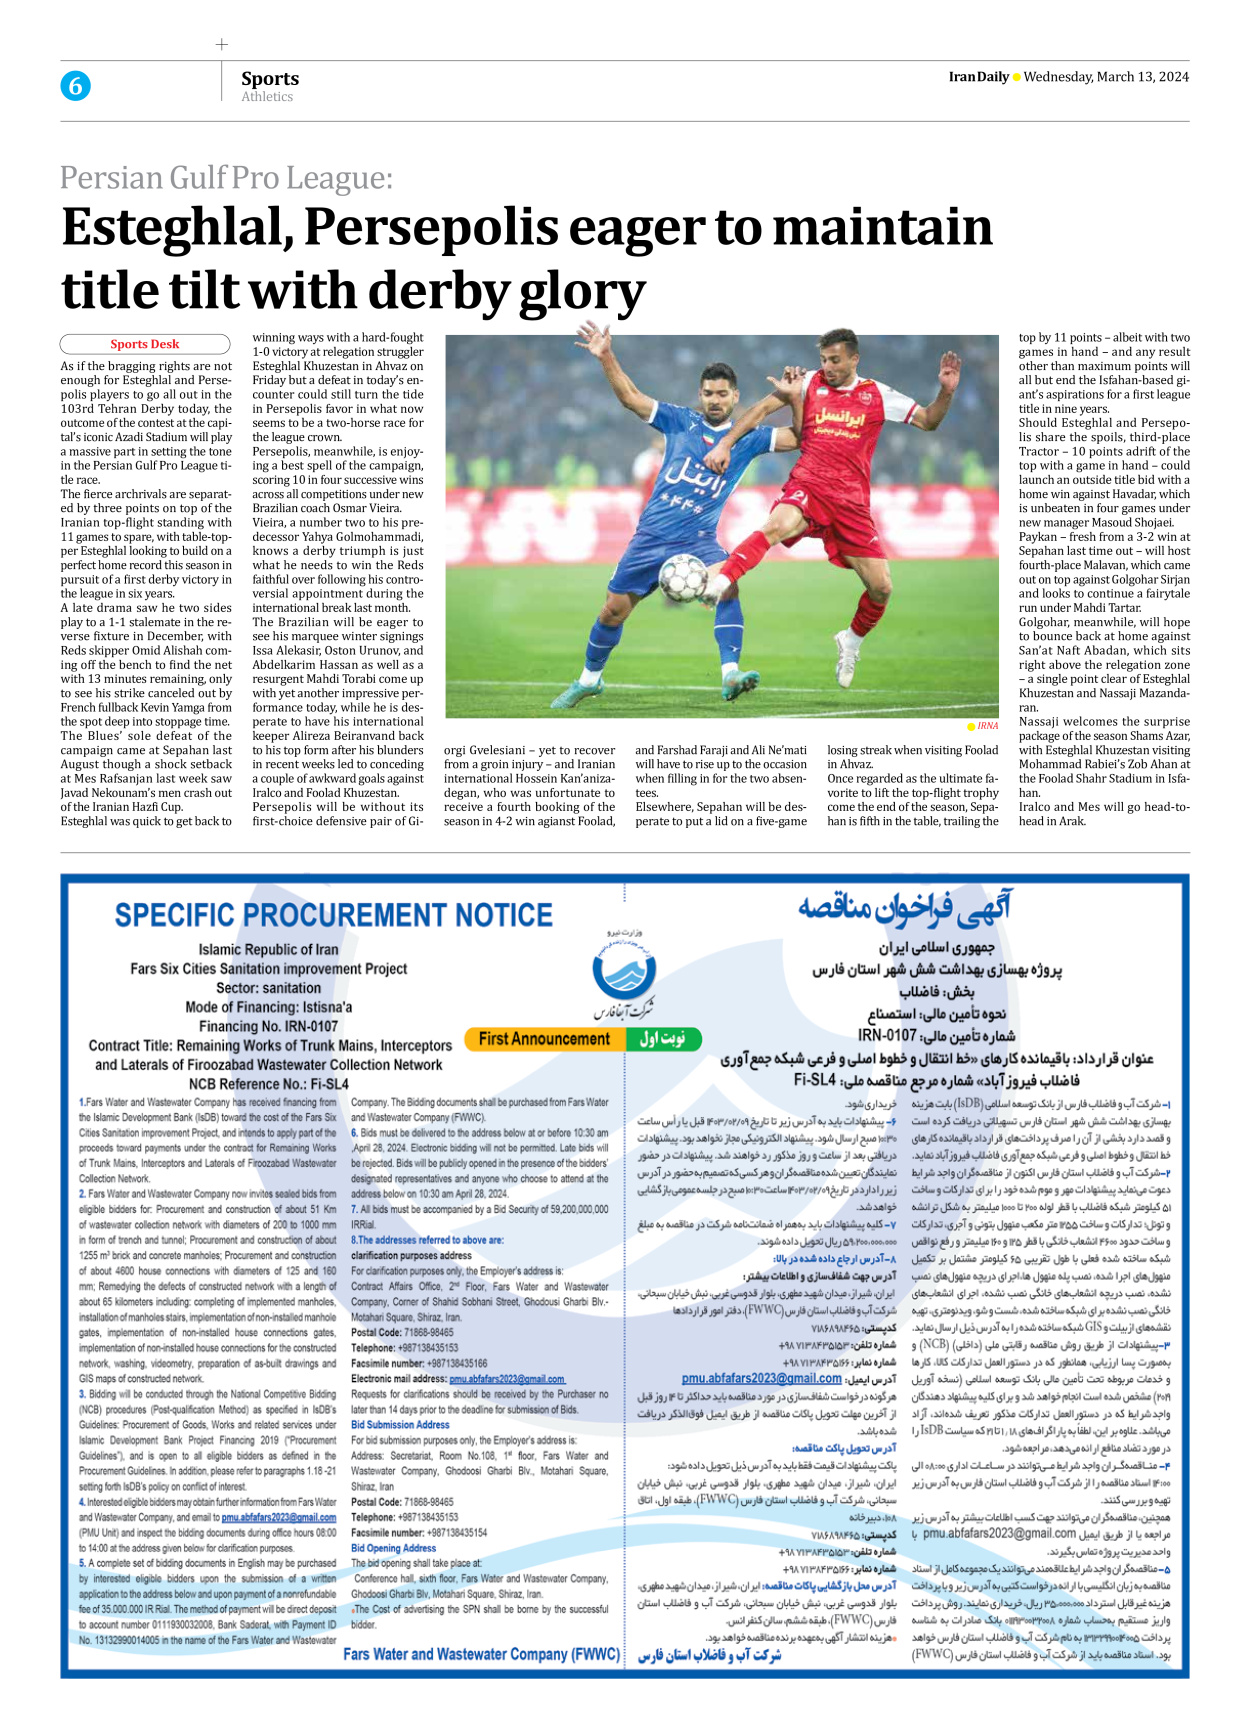 Iran Daily - Number Seven Thousand Five Hundred and Twenty Nine - 13 March 2024 - Page 6